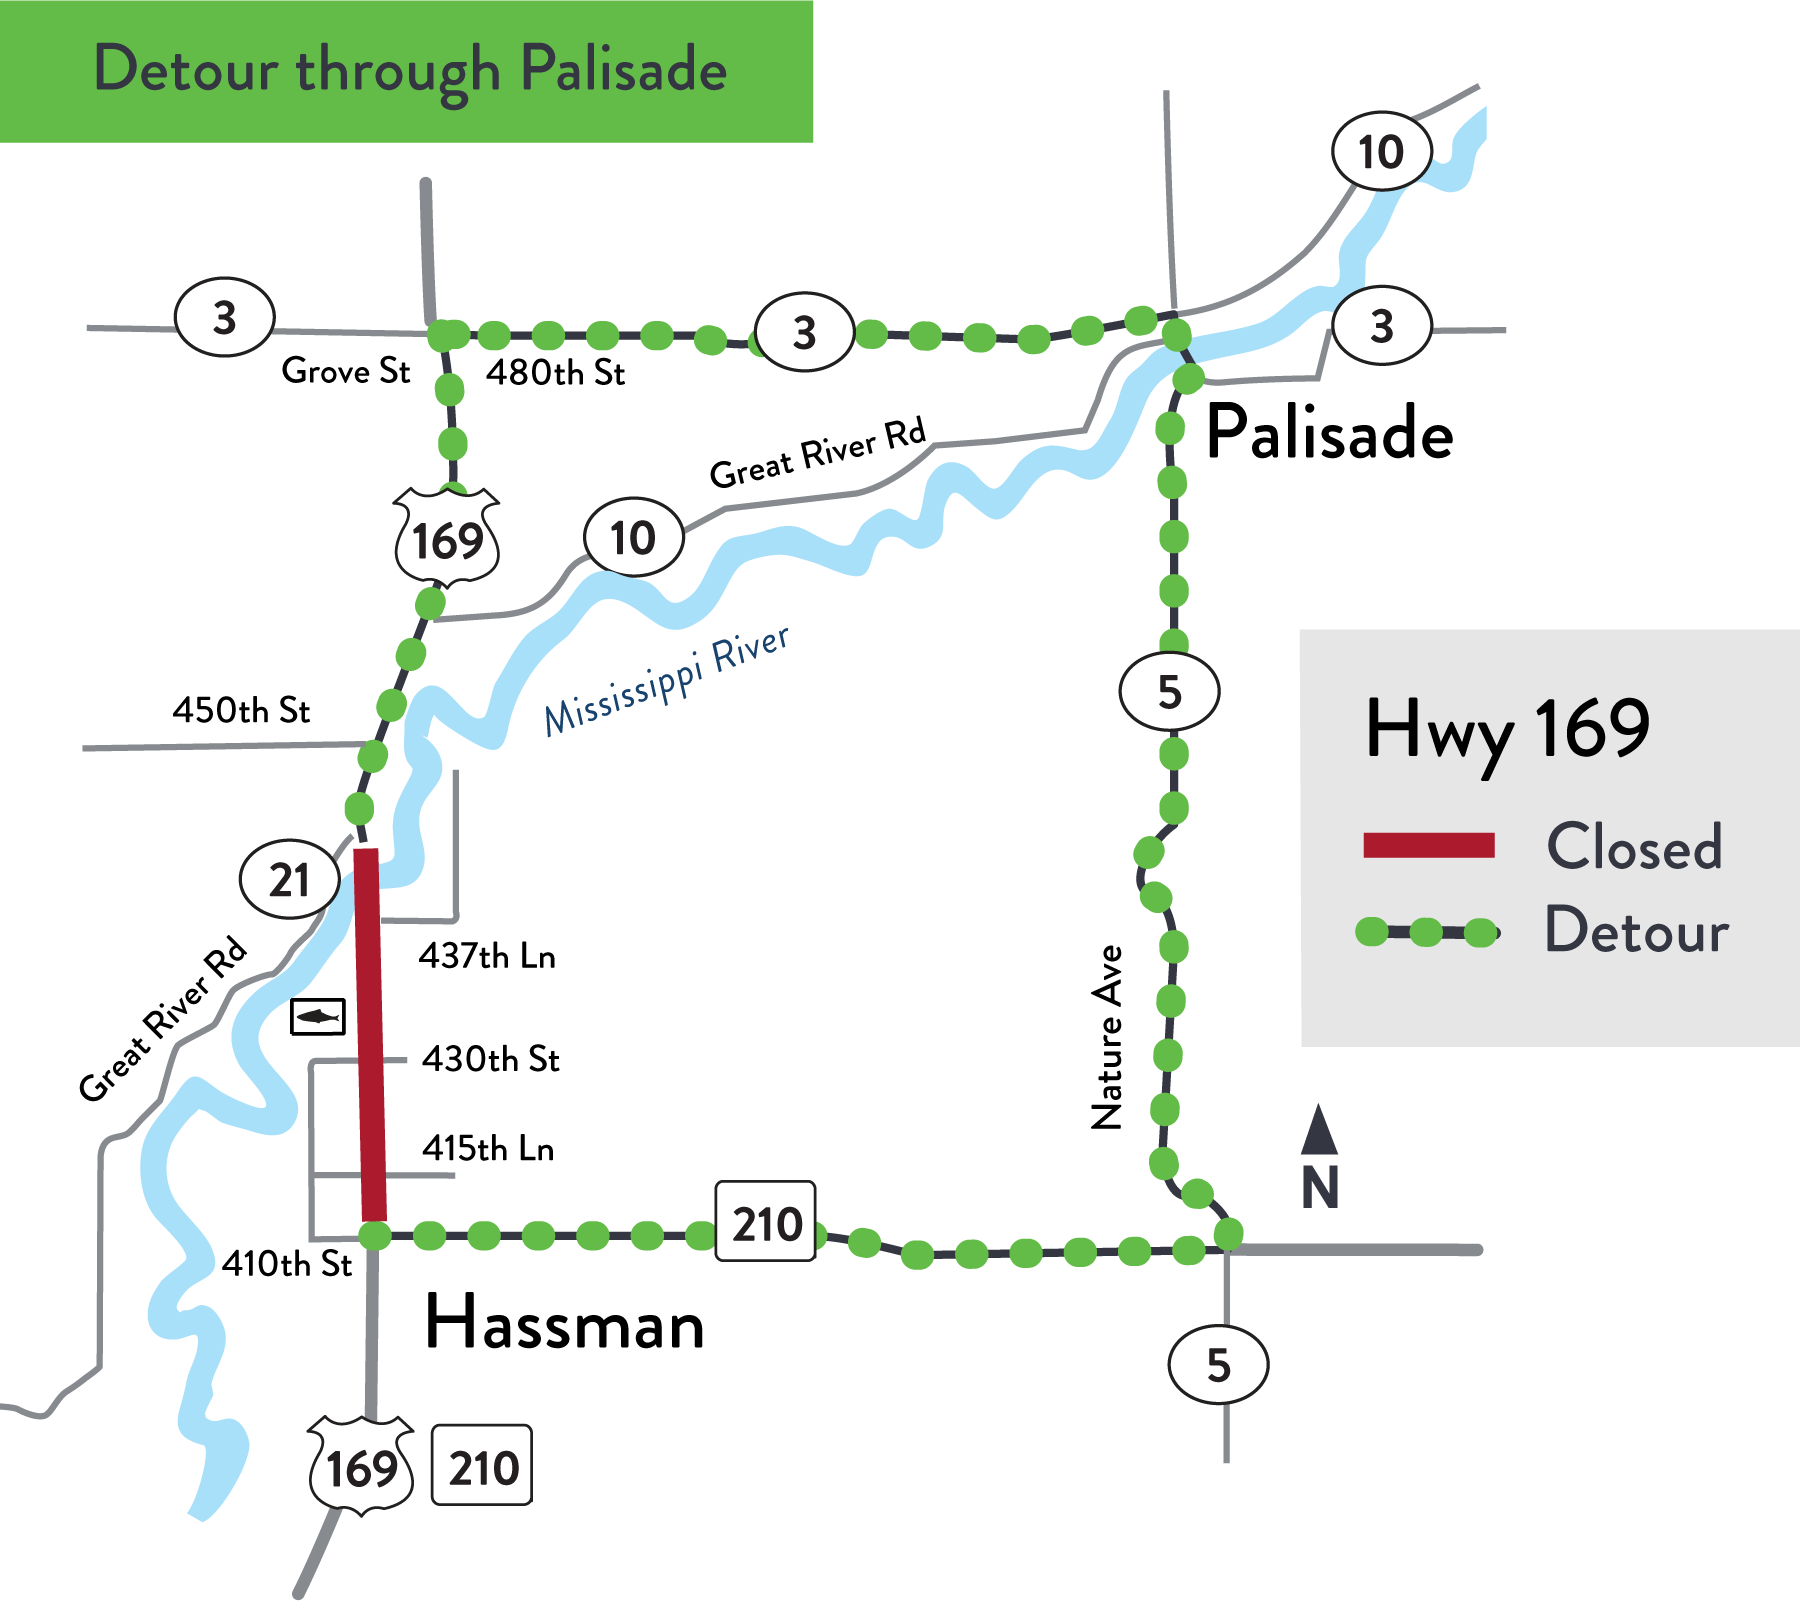 Detour in Aitkin via Hwy 169, Hwy 47 and Co. Rd. 12